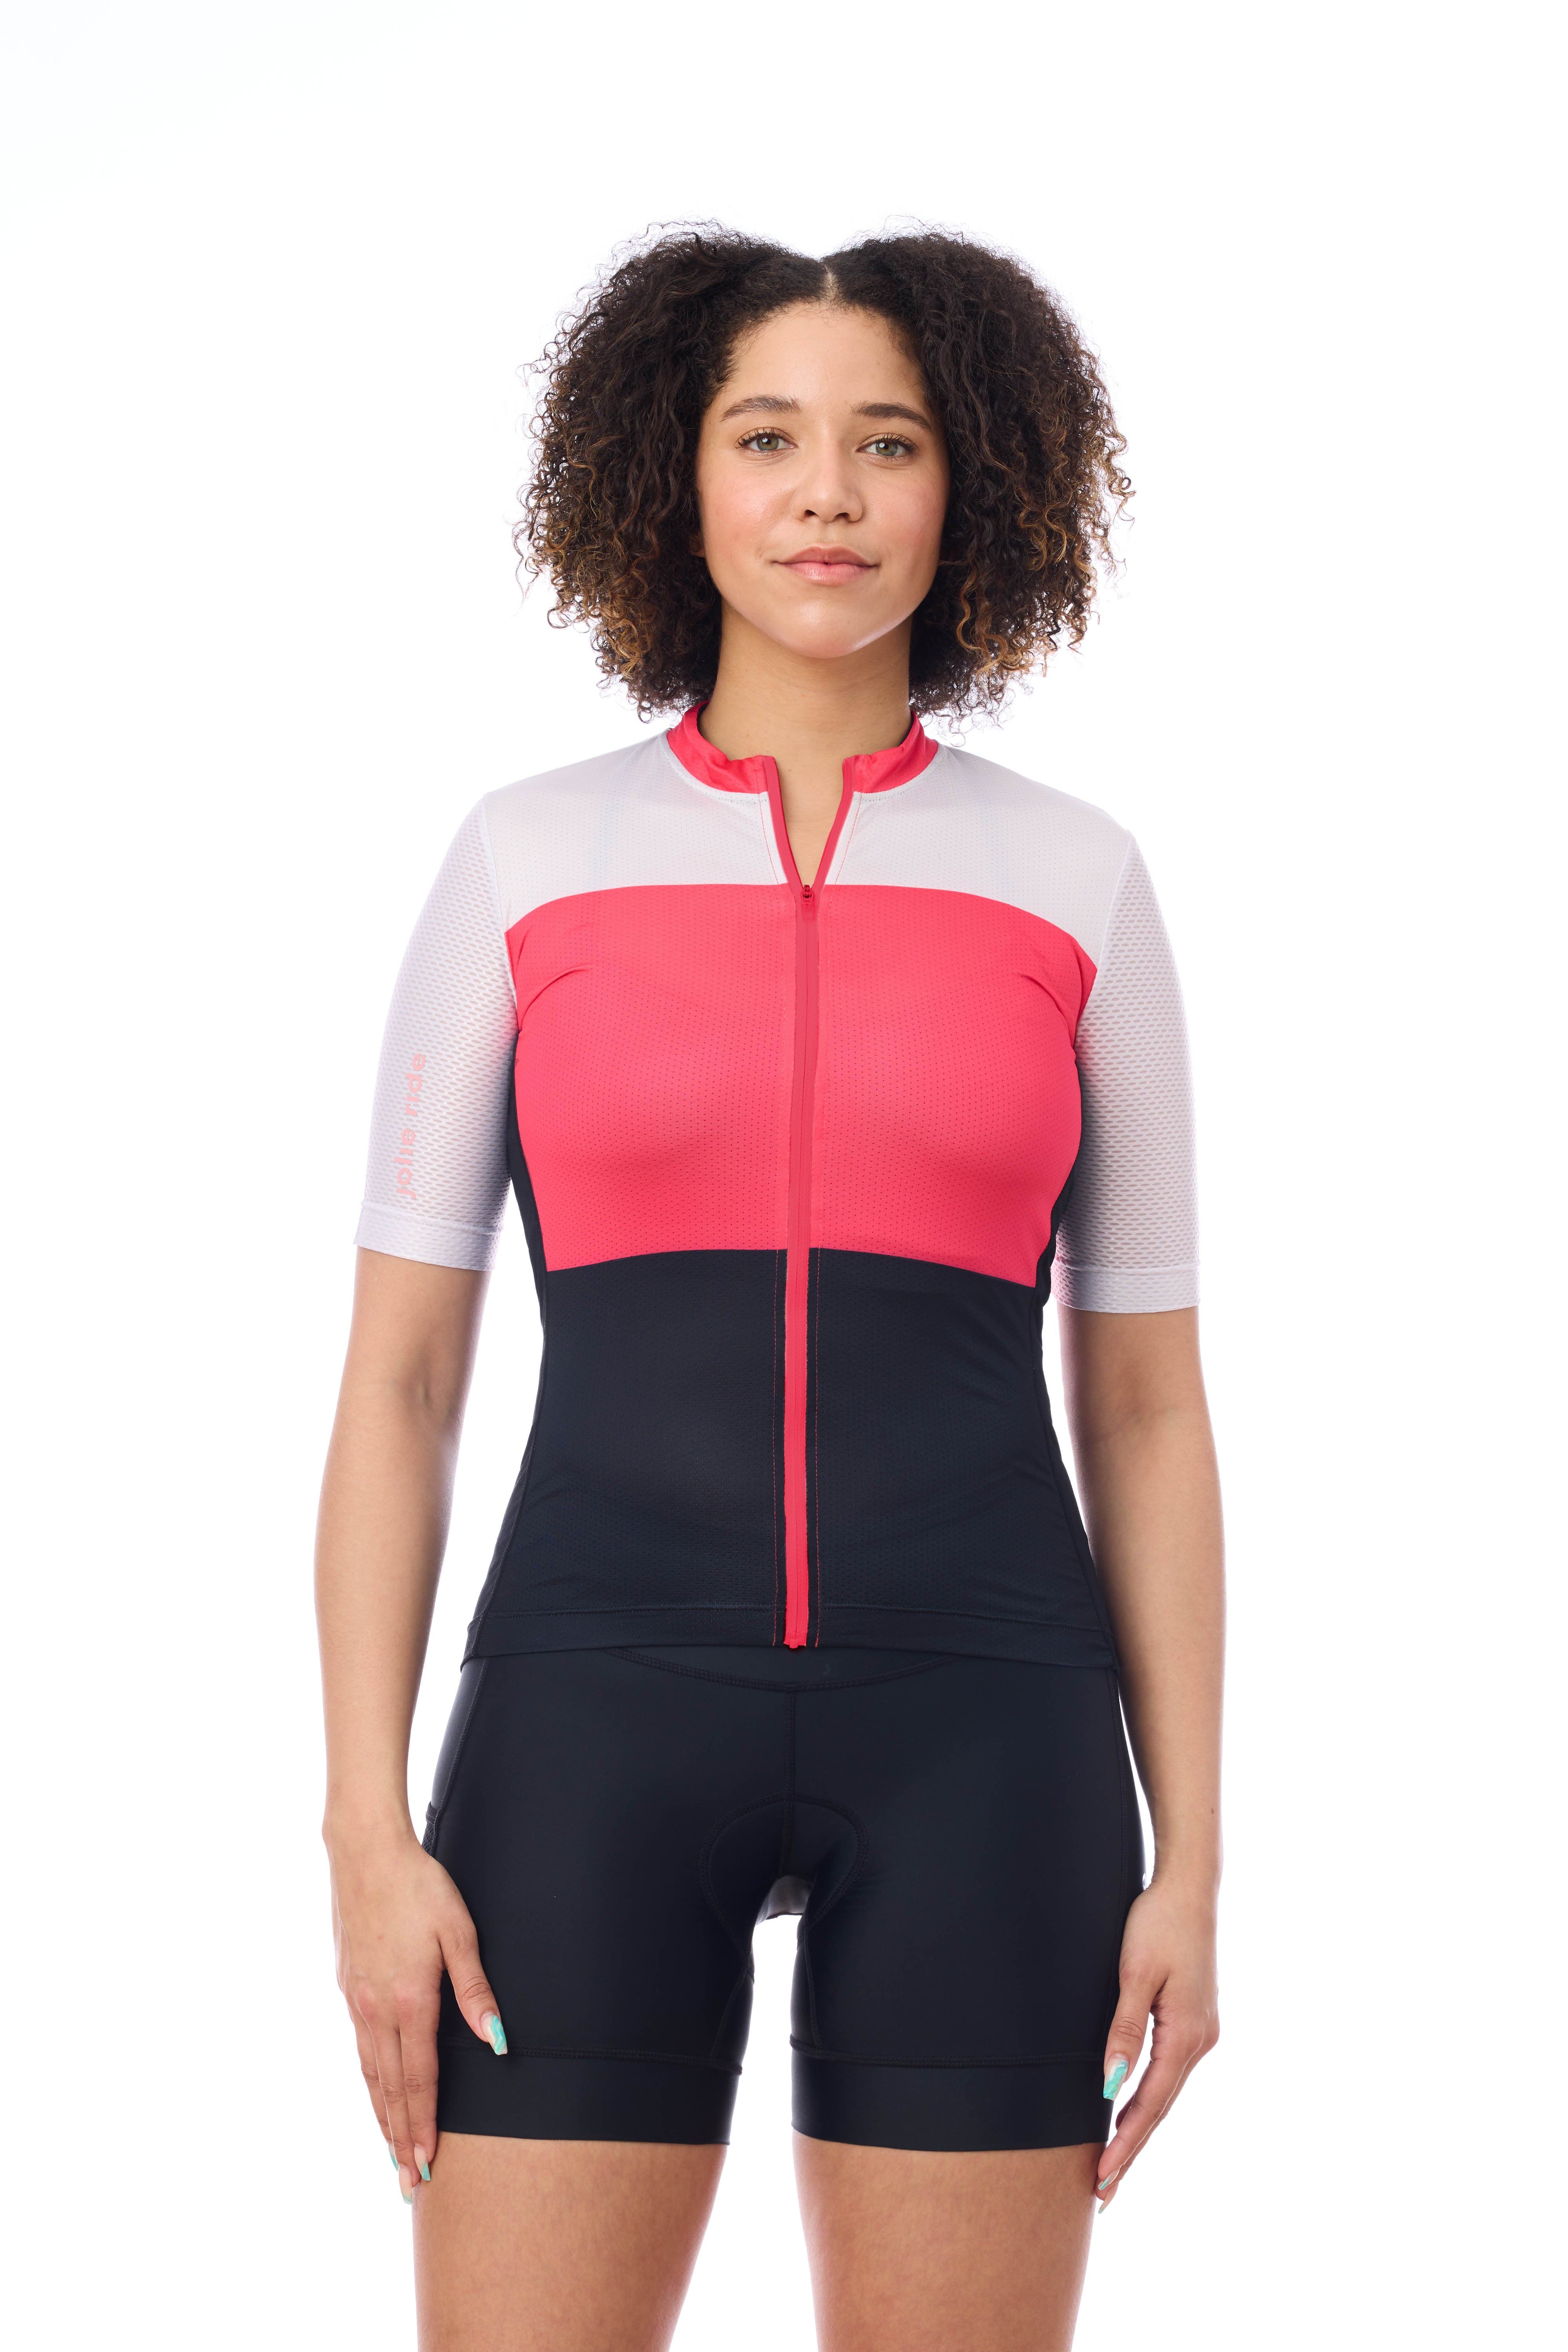 JolieRide Jersey Black Neon Pink / XS women's colorblock cycling jersey with UV protection, breathability, and storage